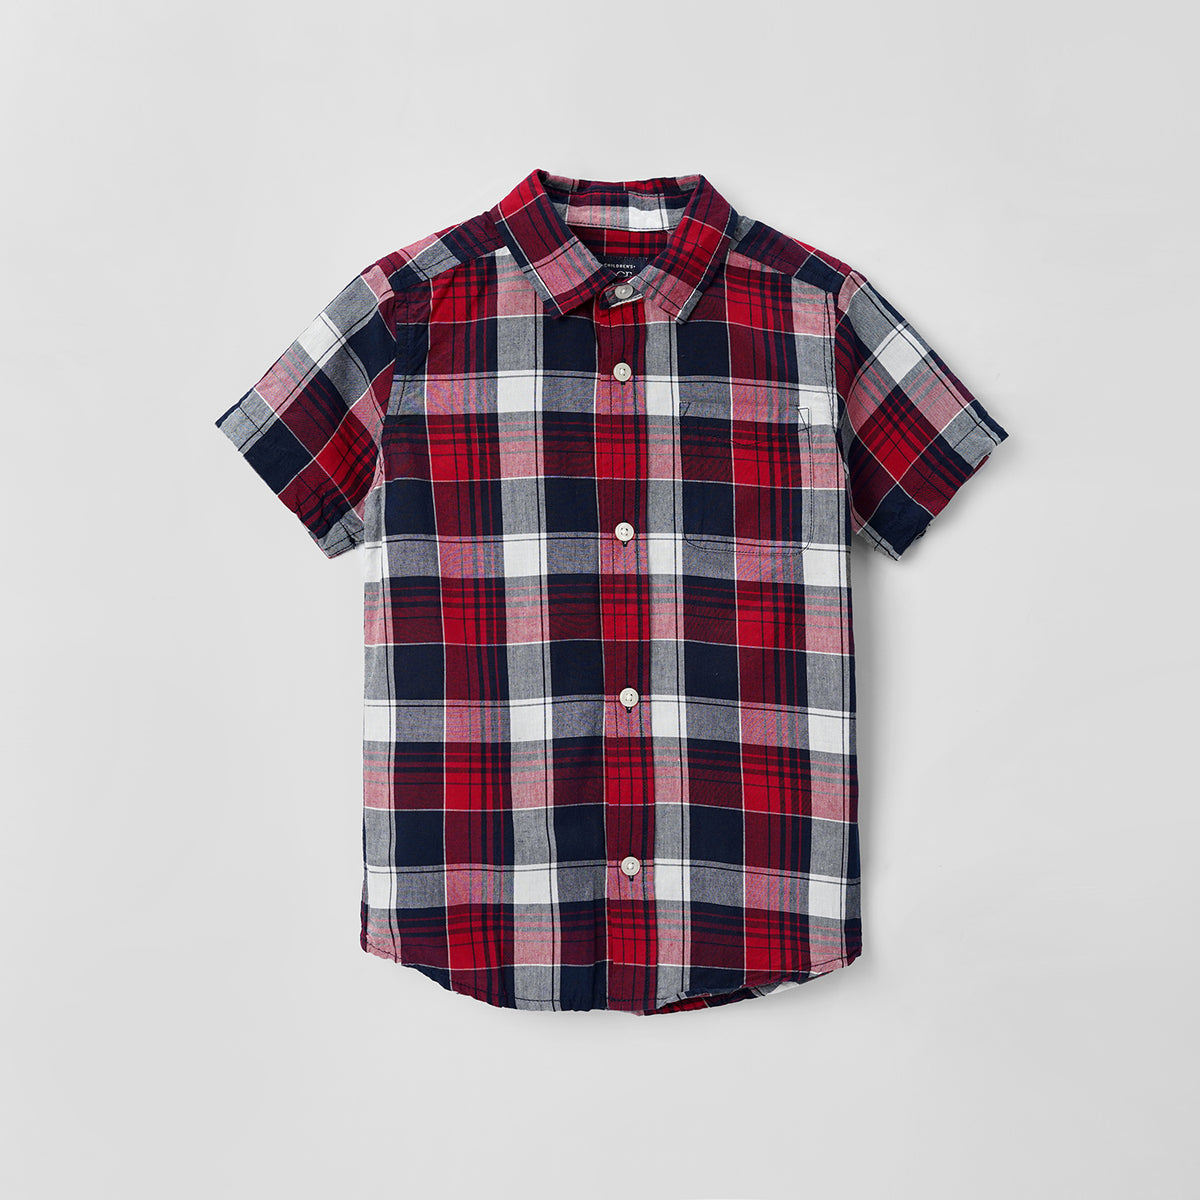 Boys Soft Cotton Short Sleeves Checked Casual Shirt